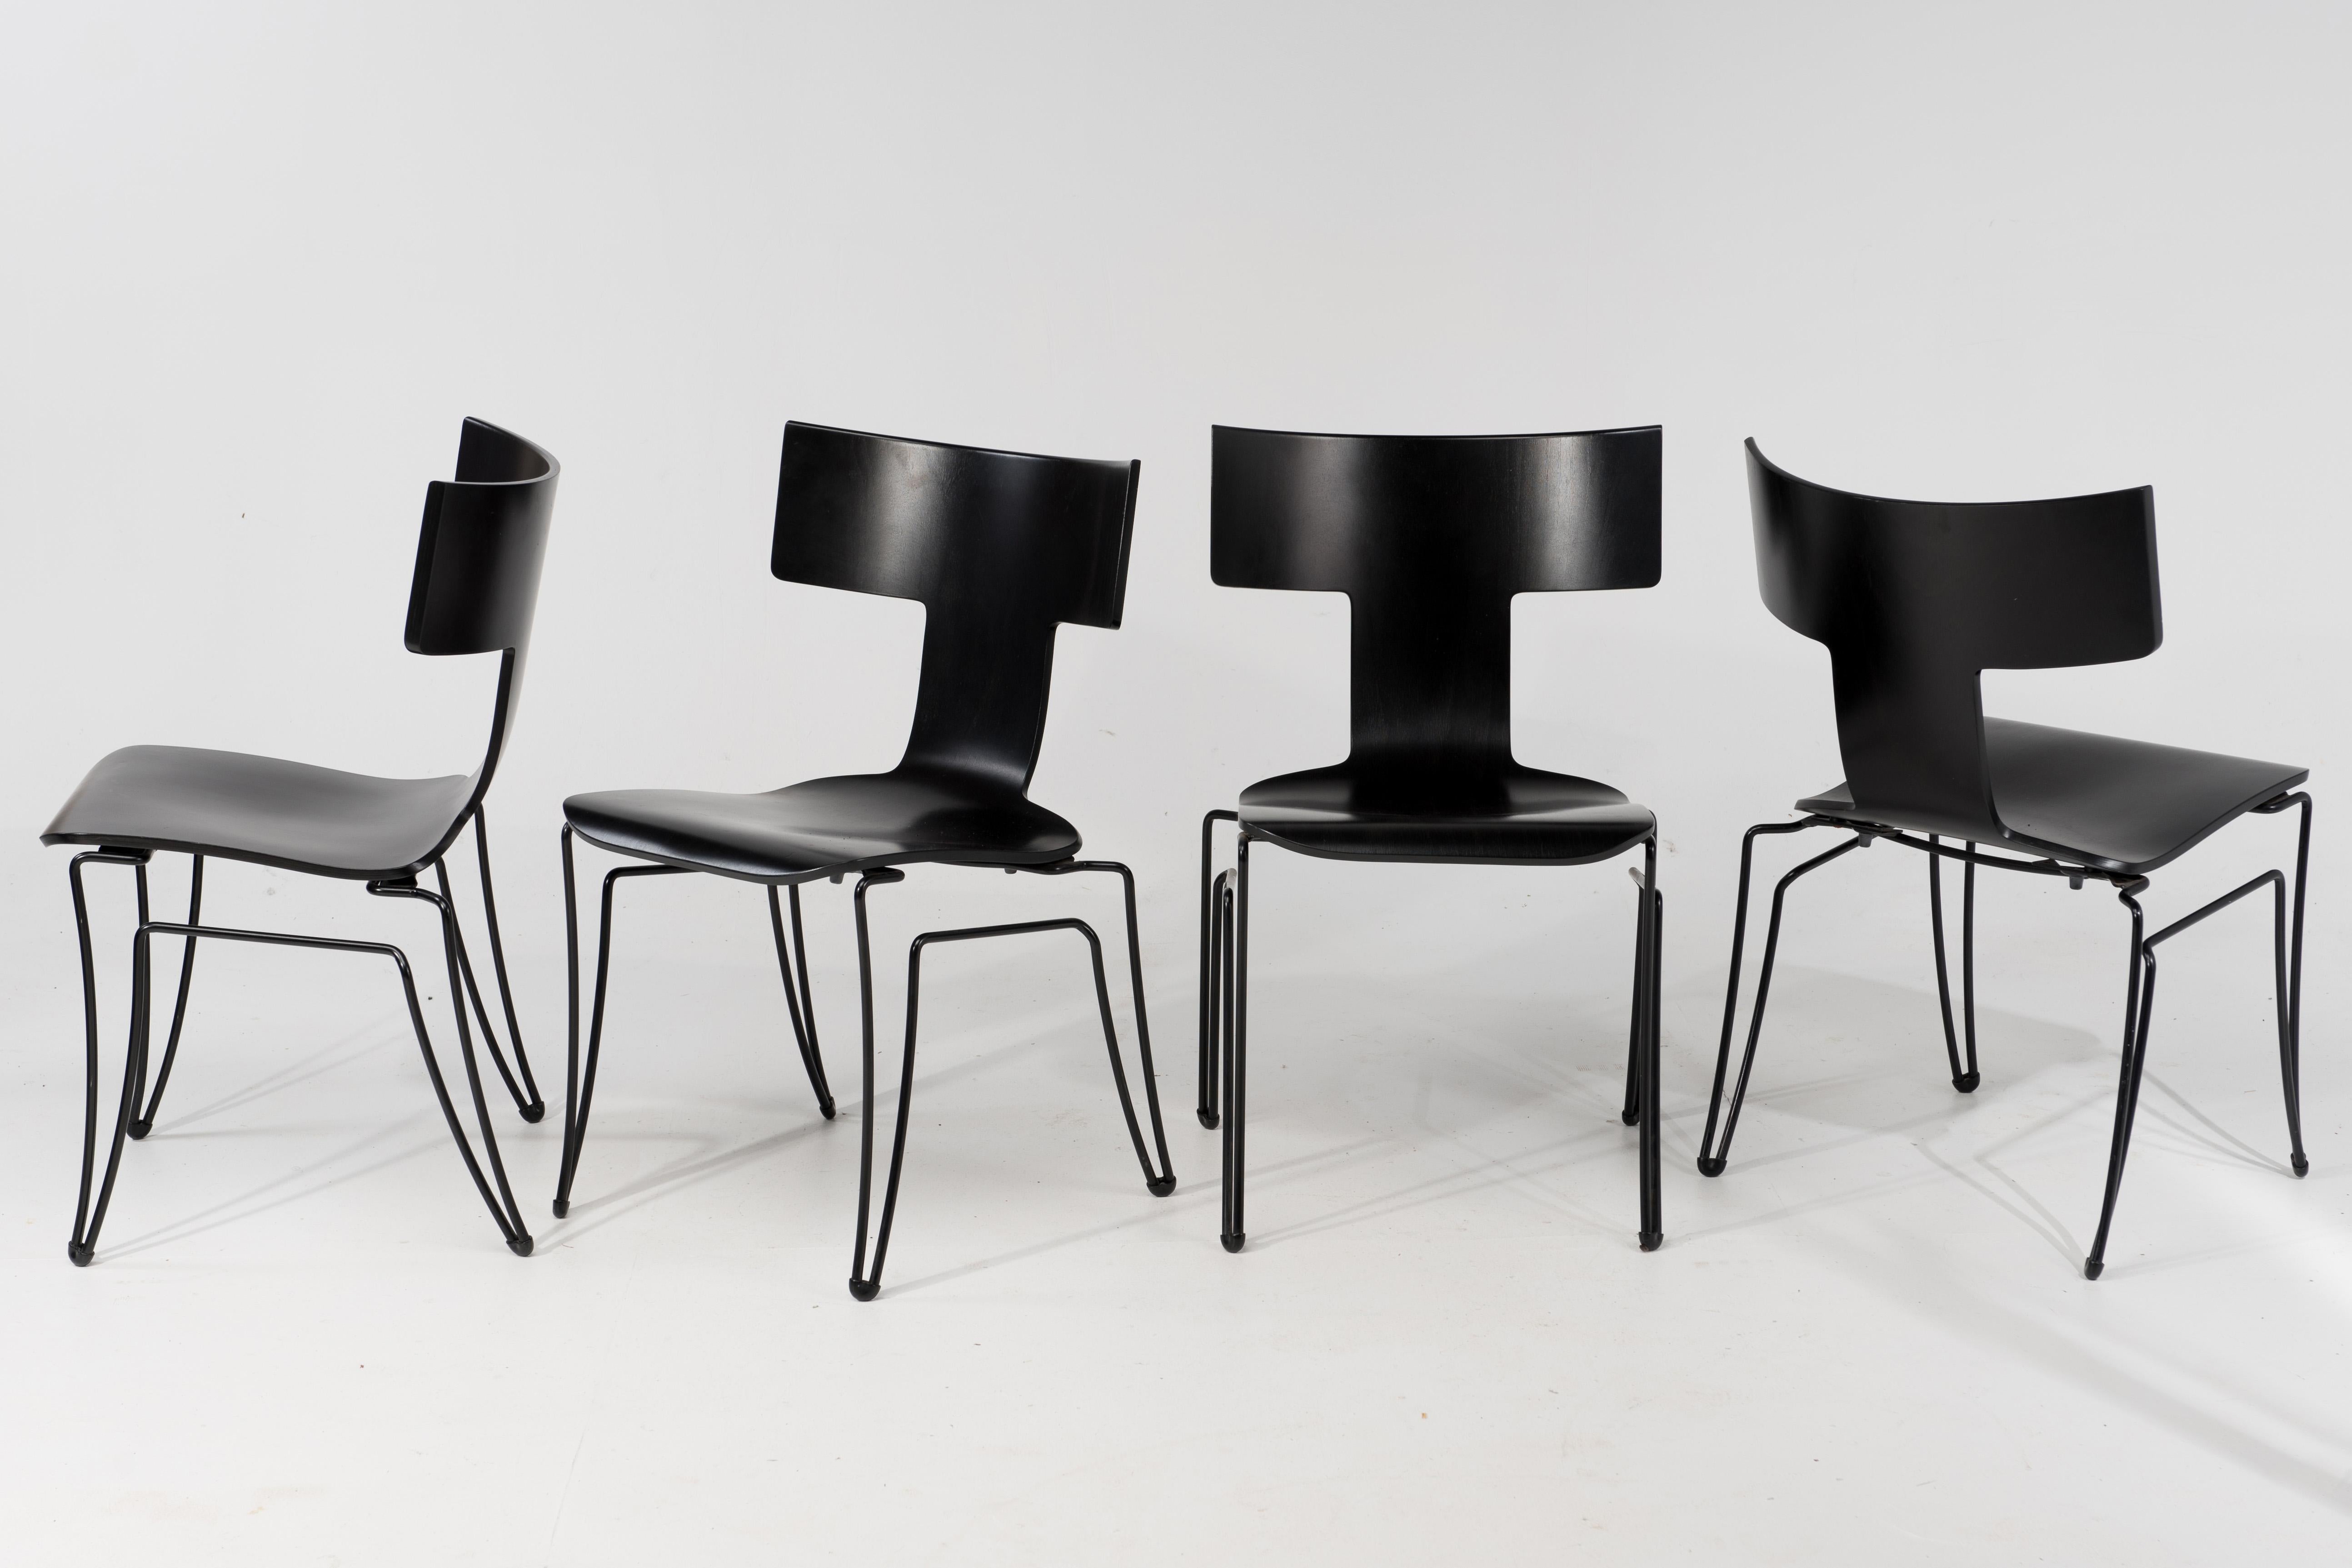 Set of 4 iconic klismos style Anziano chairs produced by Donghia in the 1980s and designed by John Hutton, having black coated steel wire structure and molded beechwood veneer. Chairs are stackable. Finish is not solid or opaque but subtly shows the